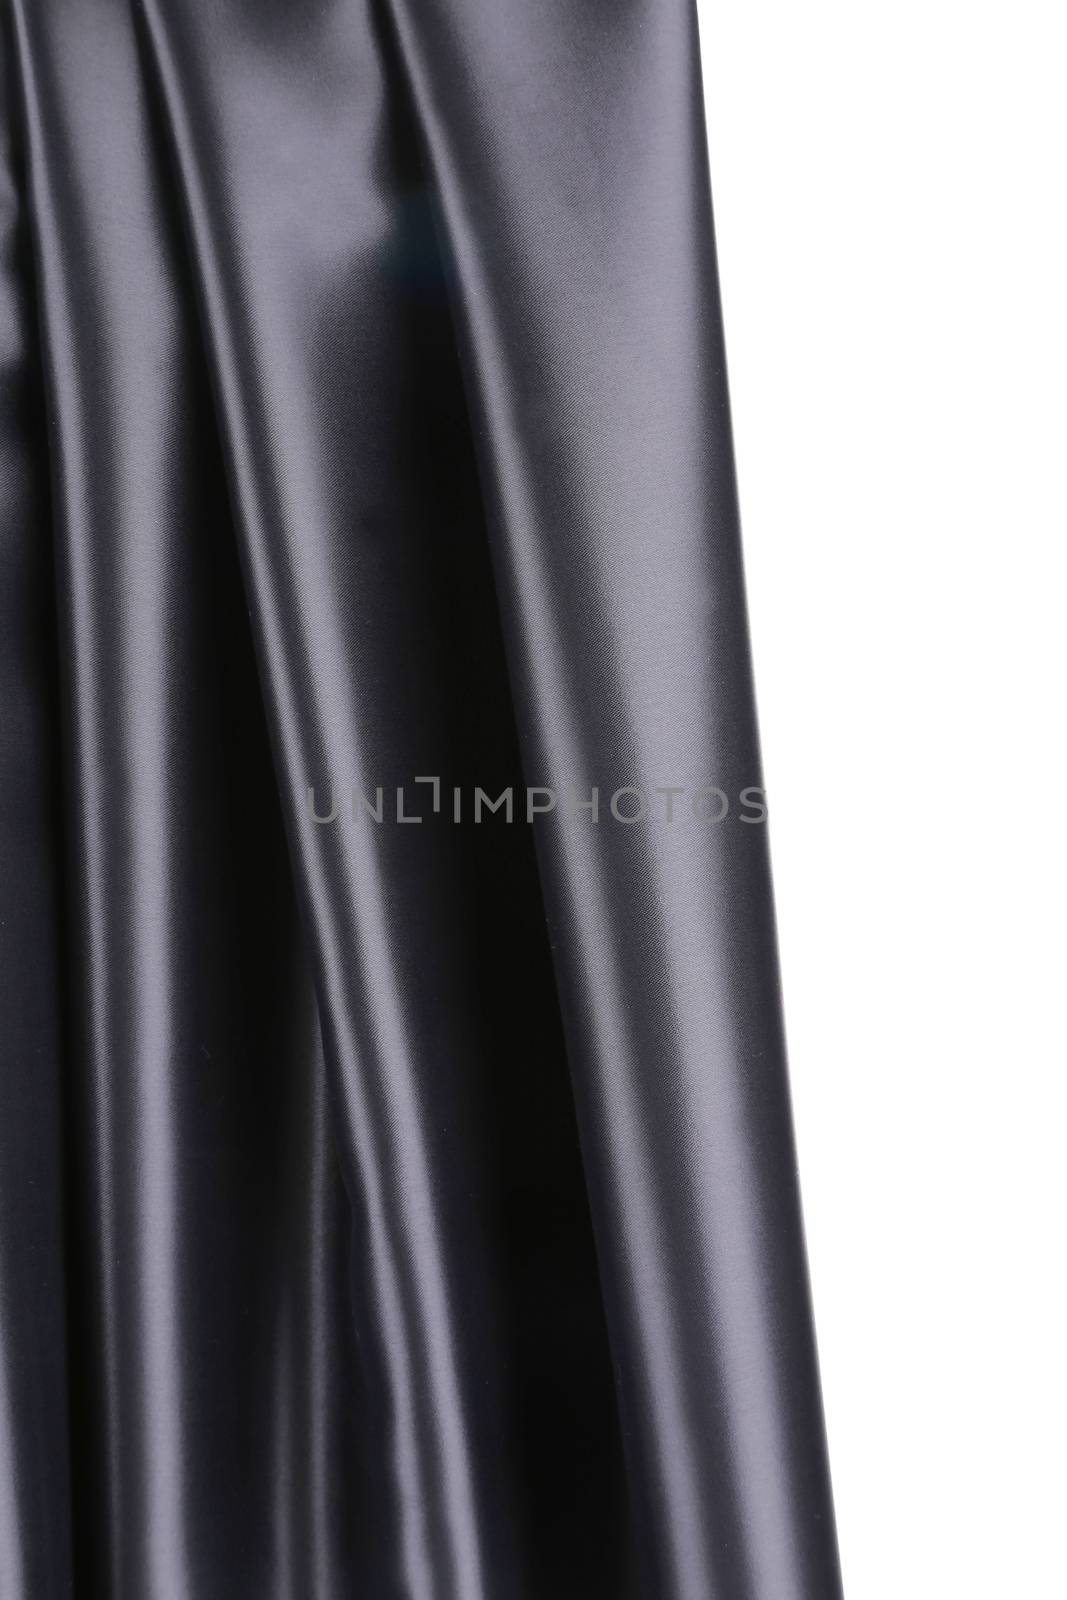 Black silk drapery. Isolated on a white background.